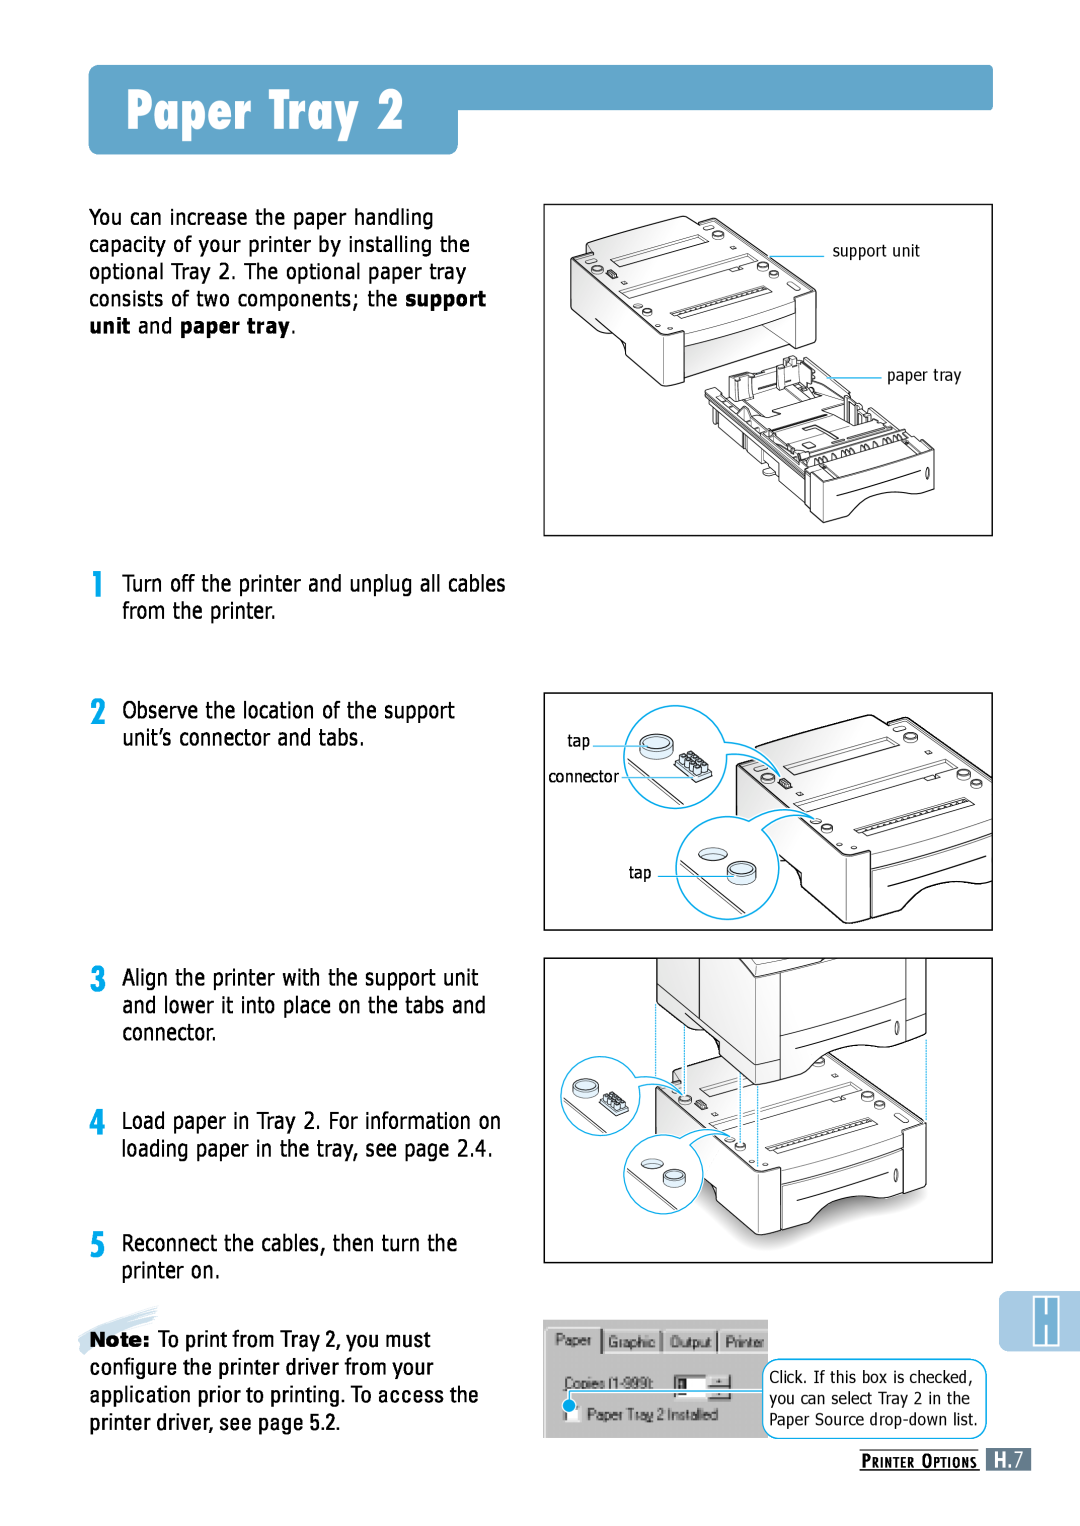 Samsung ML-6060S manual Paper Tray, Turn off the printer and unplug all cables from the printer, support unit, connector 